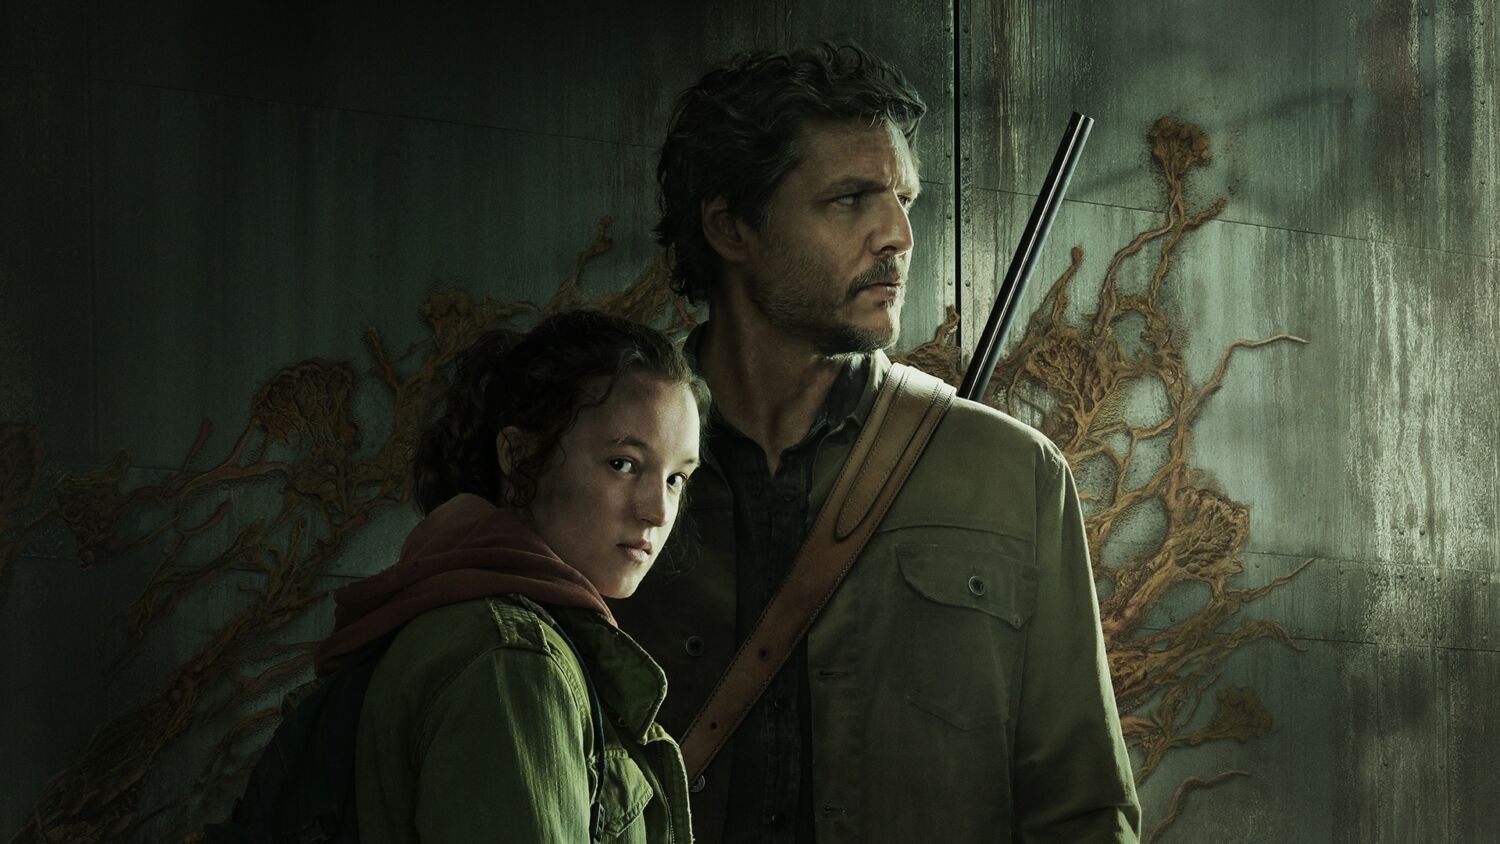 The Last of Us infectious Viewership Growth is HBO's Largest Ever From Premiere To Second Episode